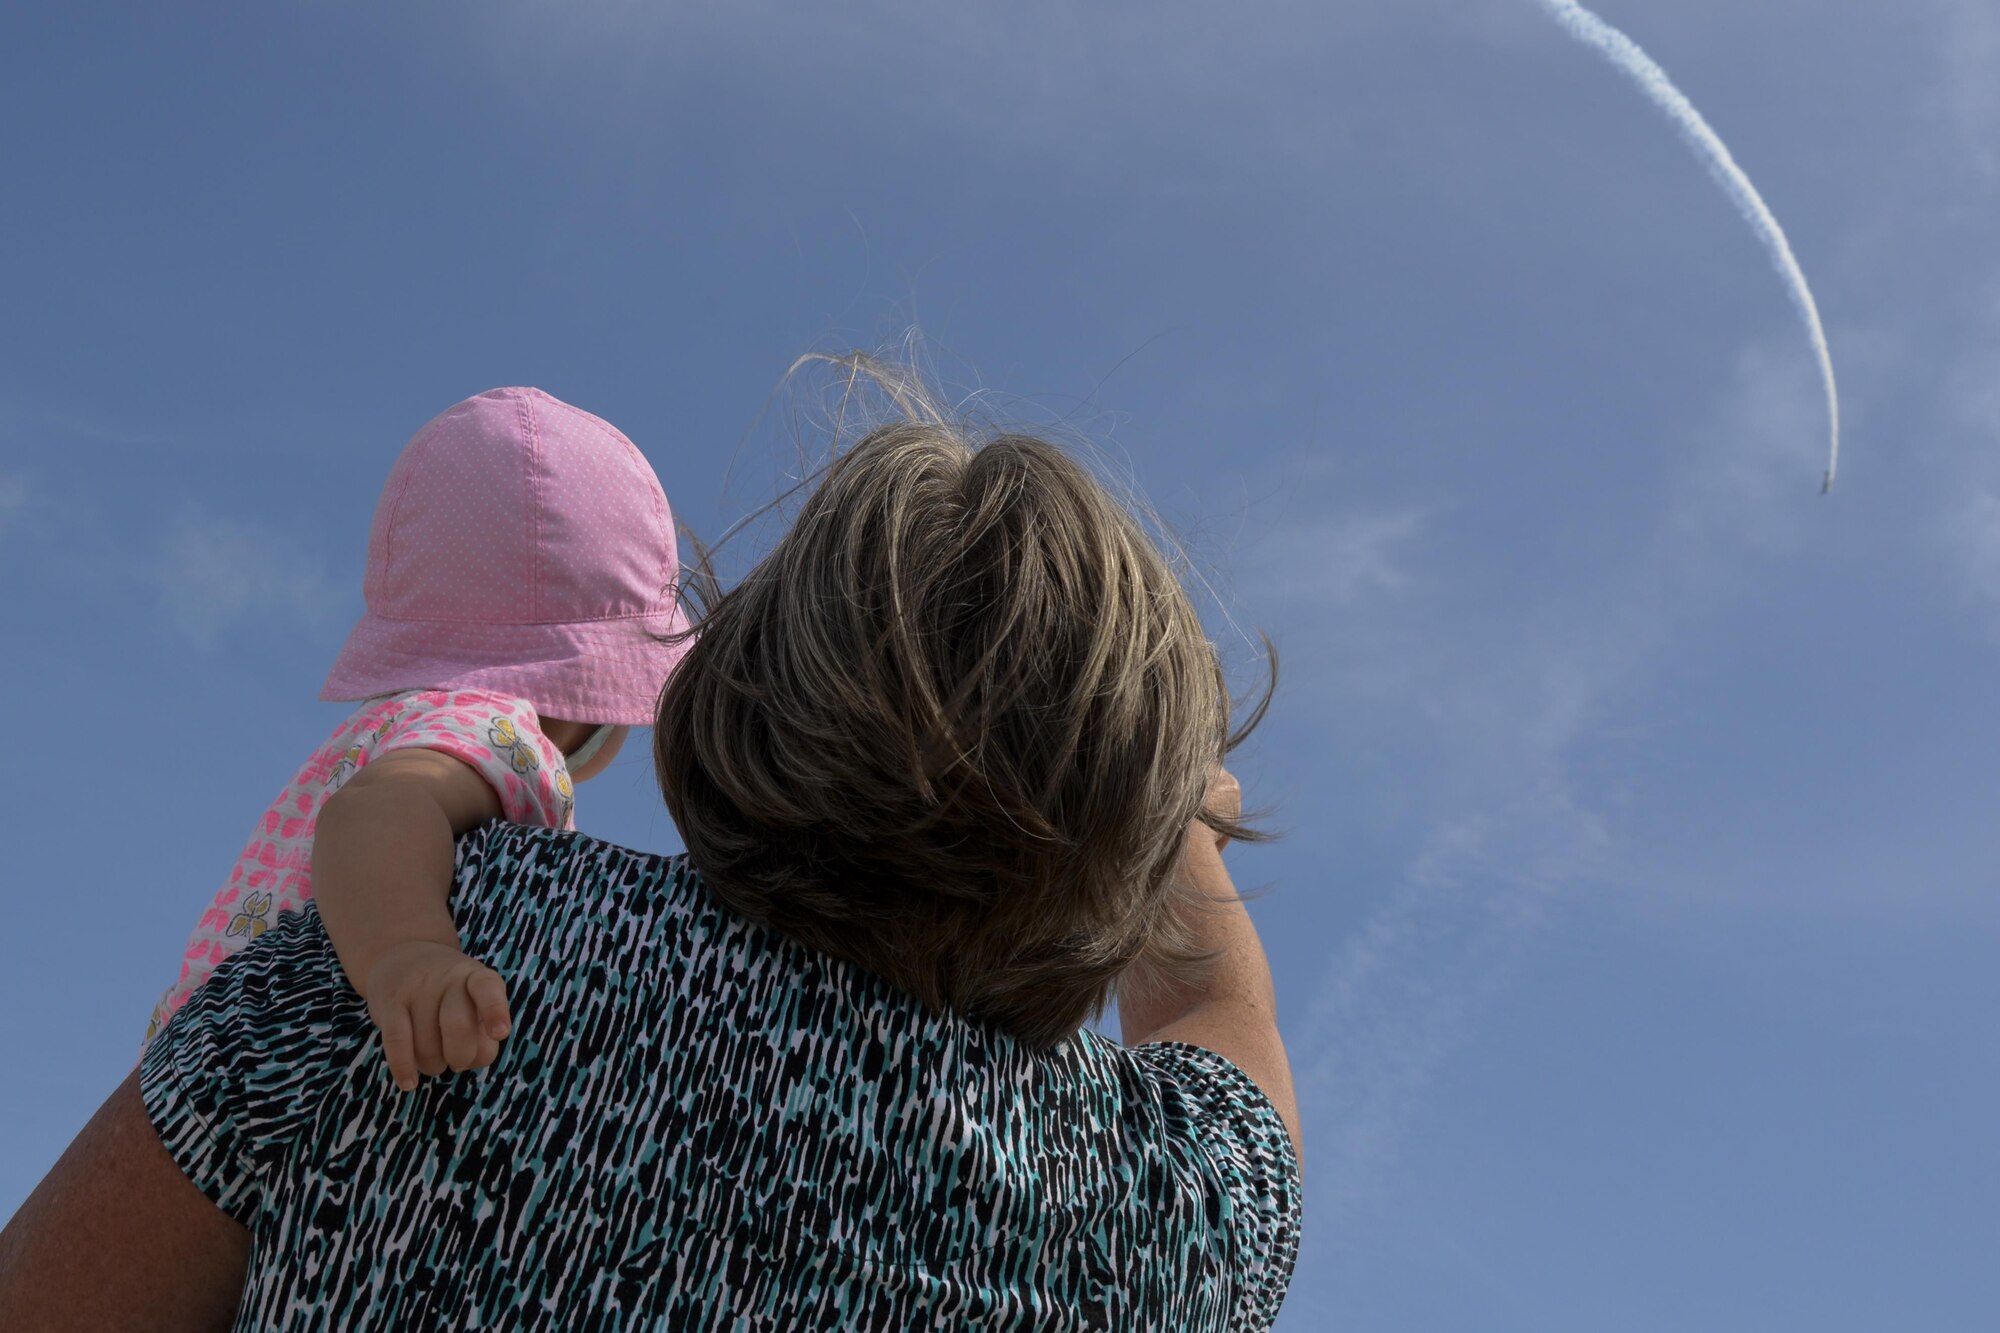 Guests of Team Dover watch an aerial performer fly above Dover Air Force Base, Del., Aug. 27, 2017, during the Thunder Over Dover Open House. This was Team Dover’s first open house since 2009, and the first held on the base since 1994. (U.S. Air Force photo by Staff Sgt. Aaron J. Jenne)